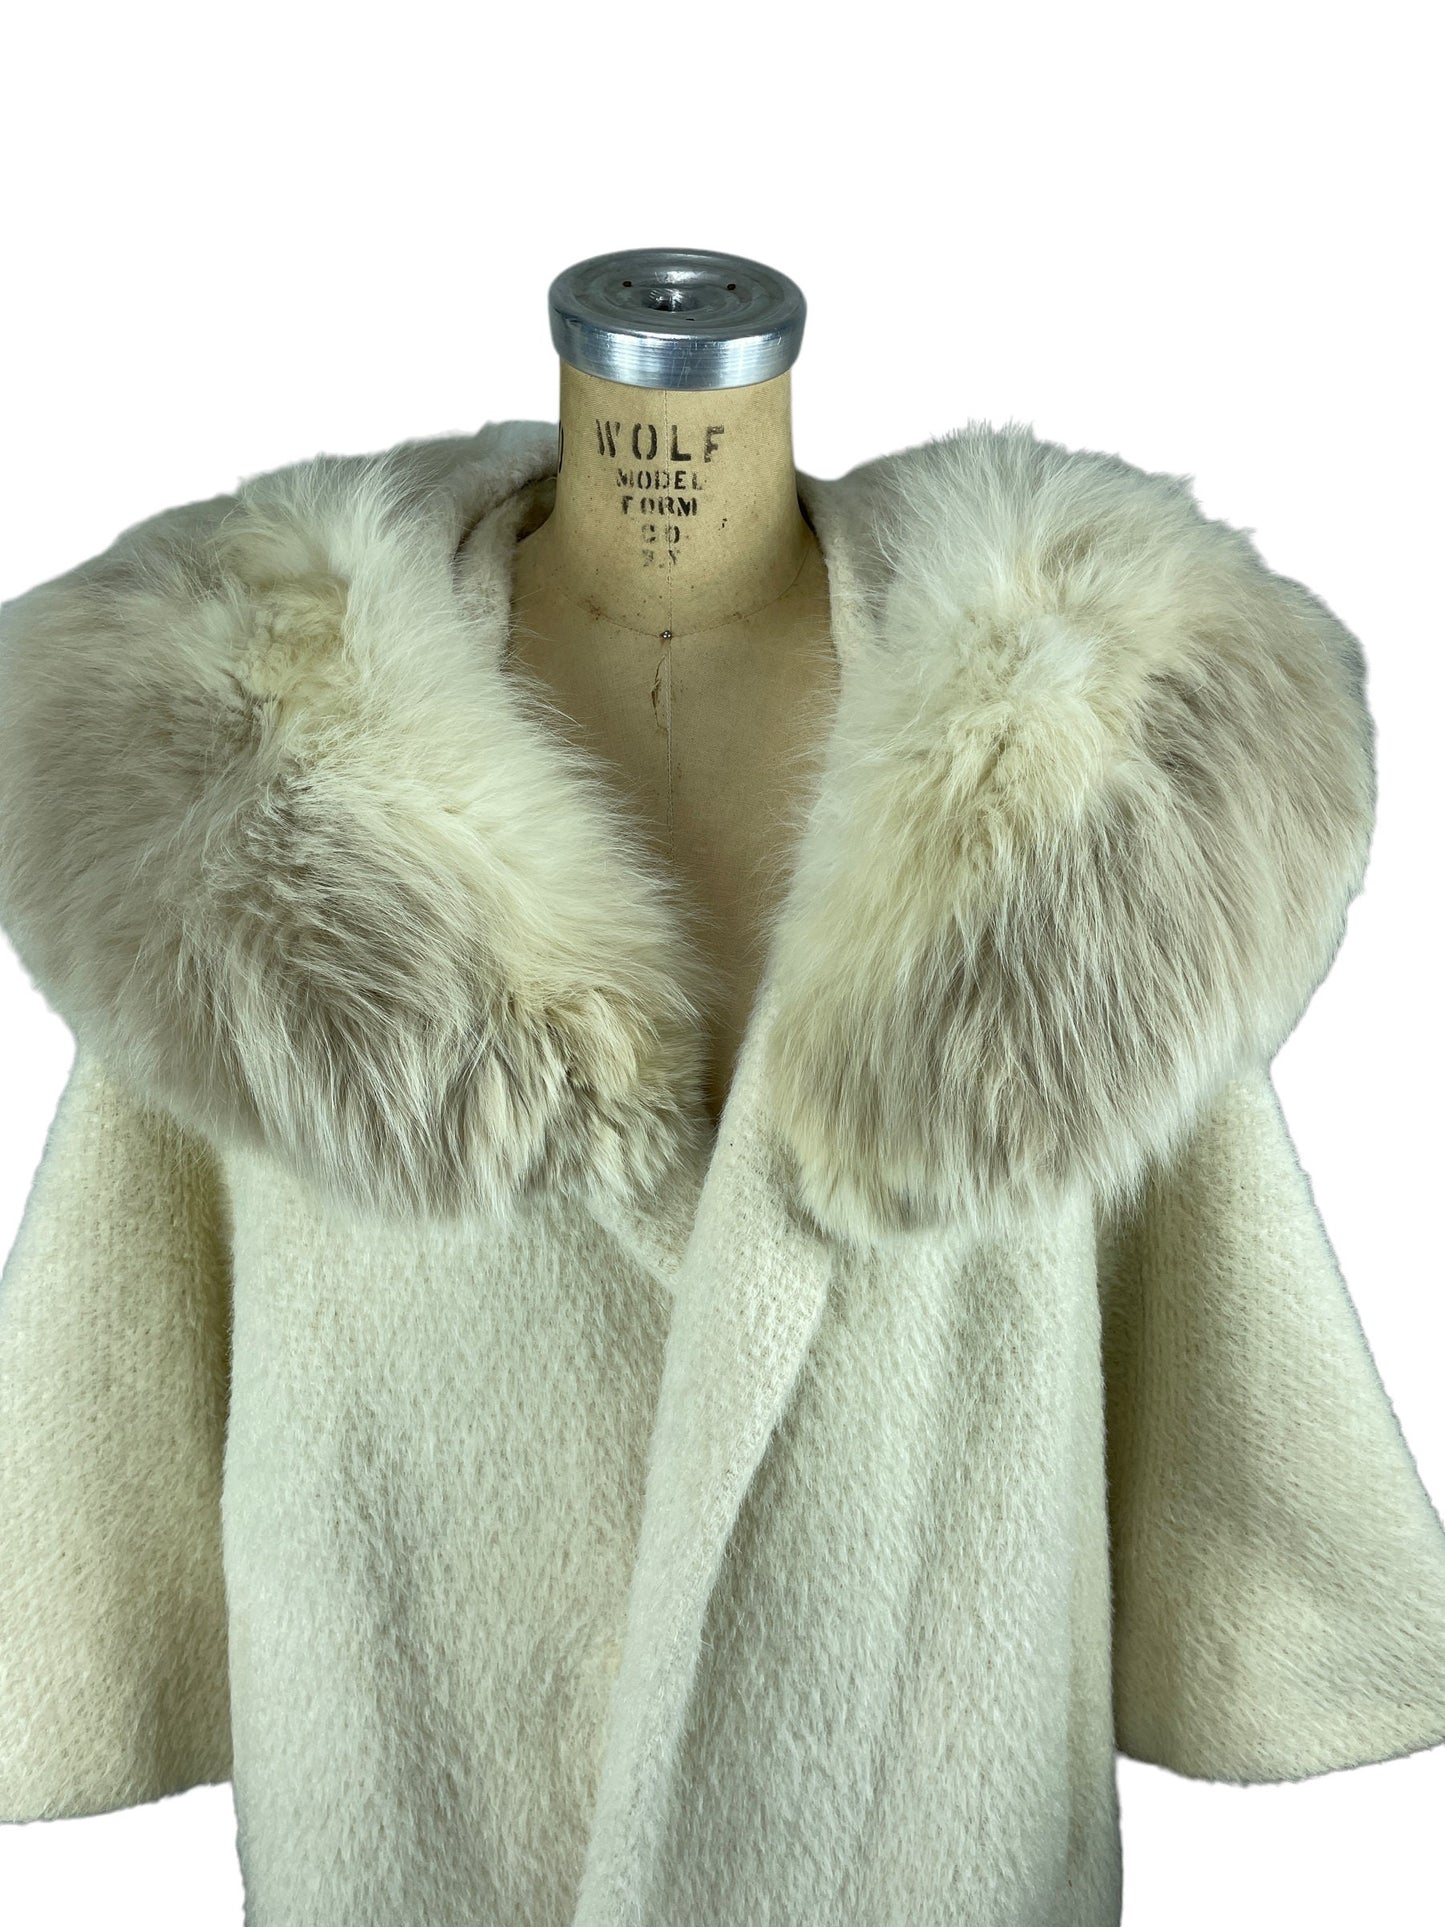 1950s ivory wool coat with large fur collar Size L